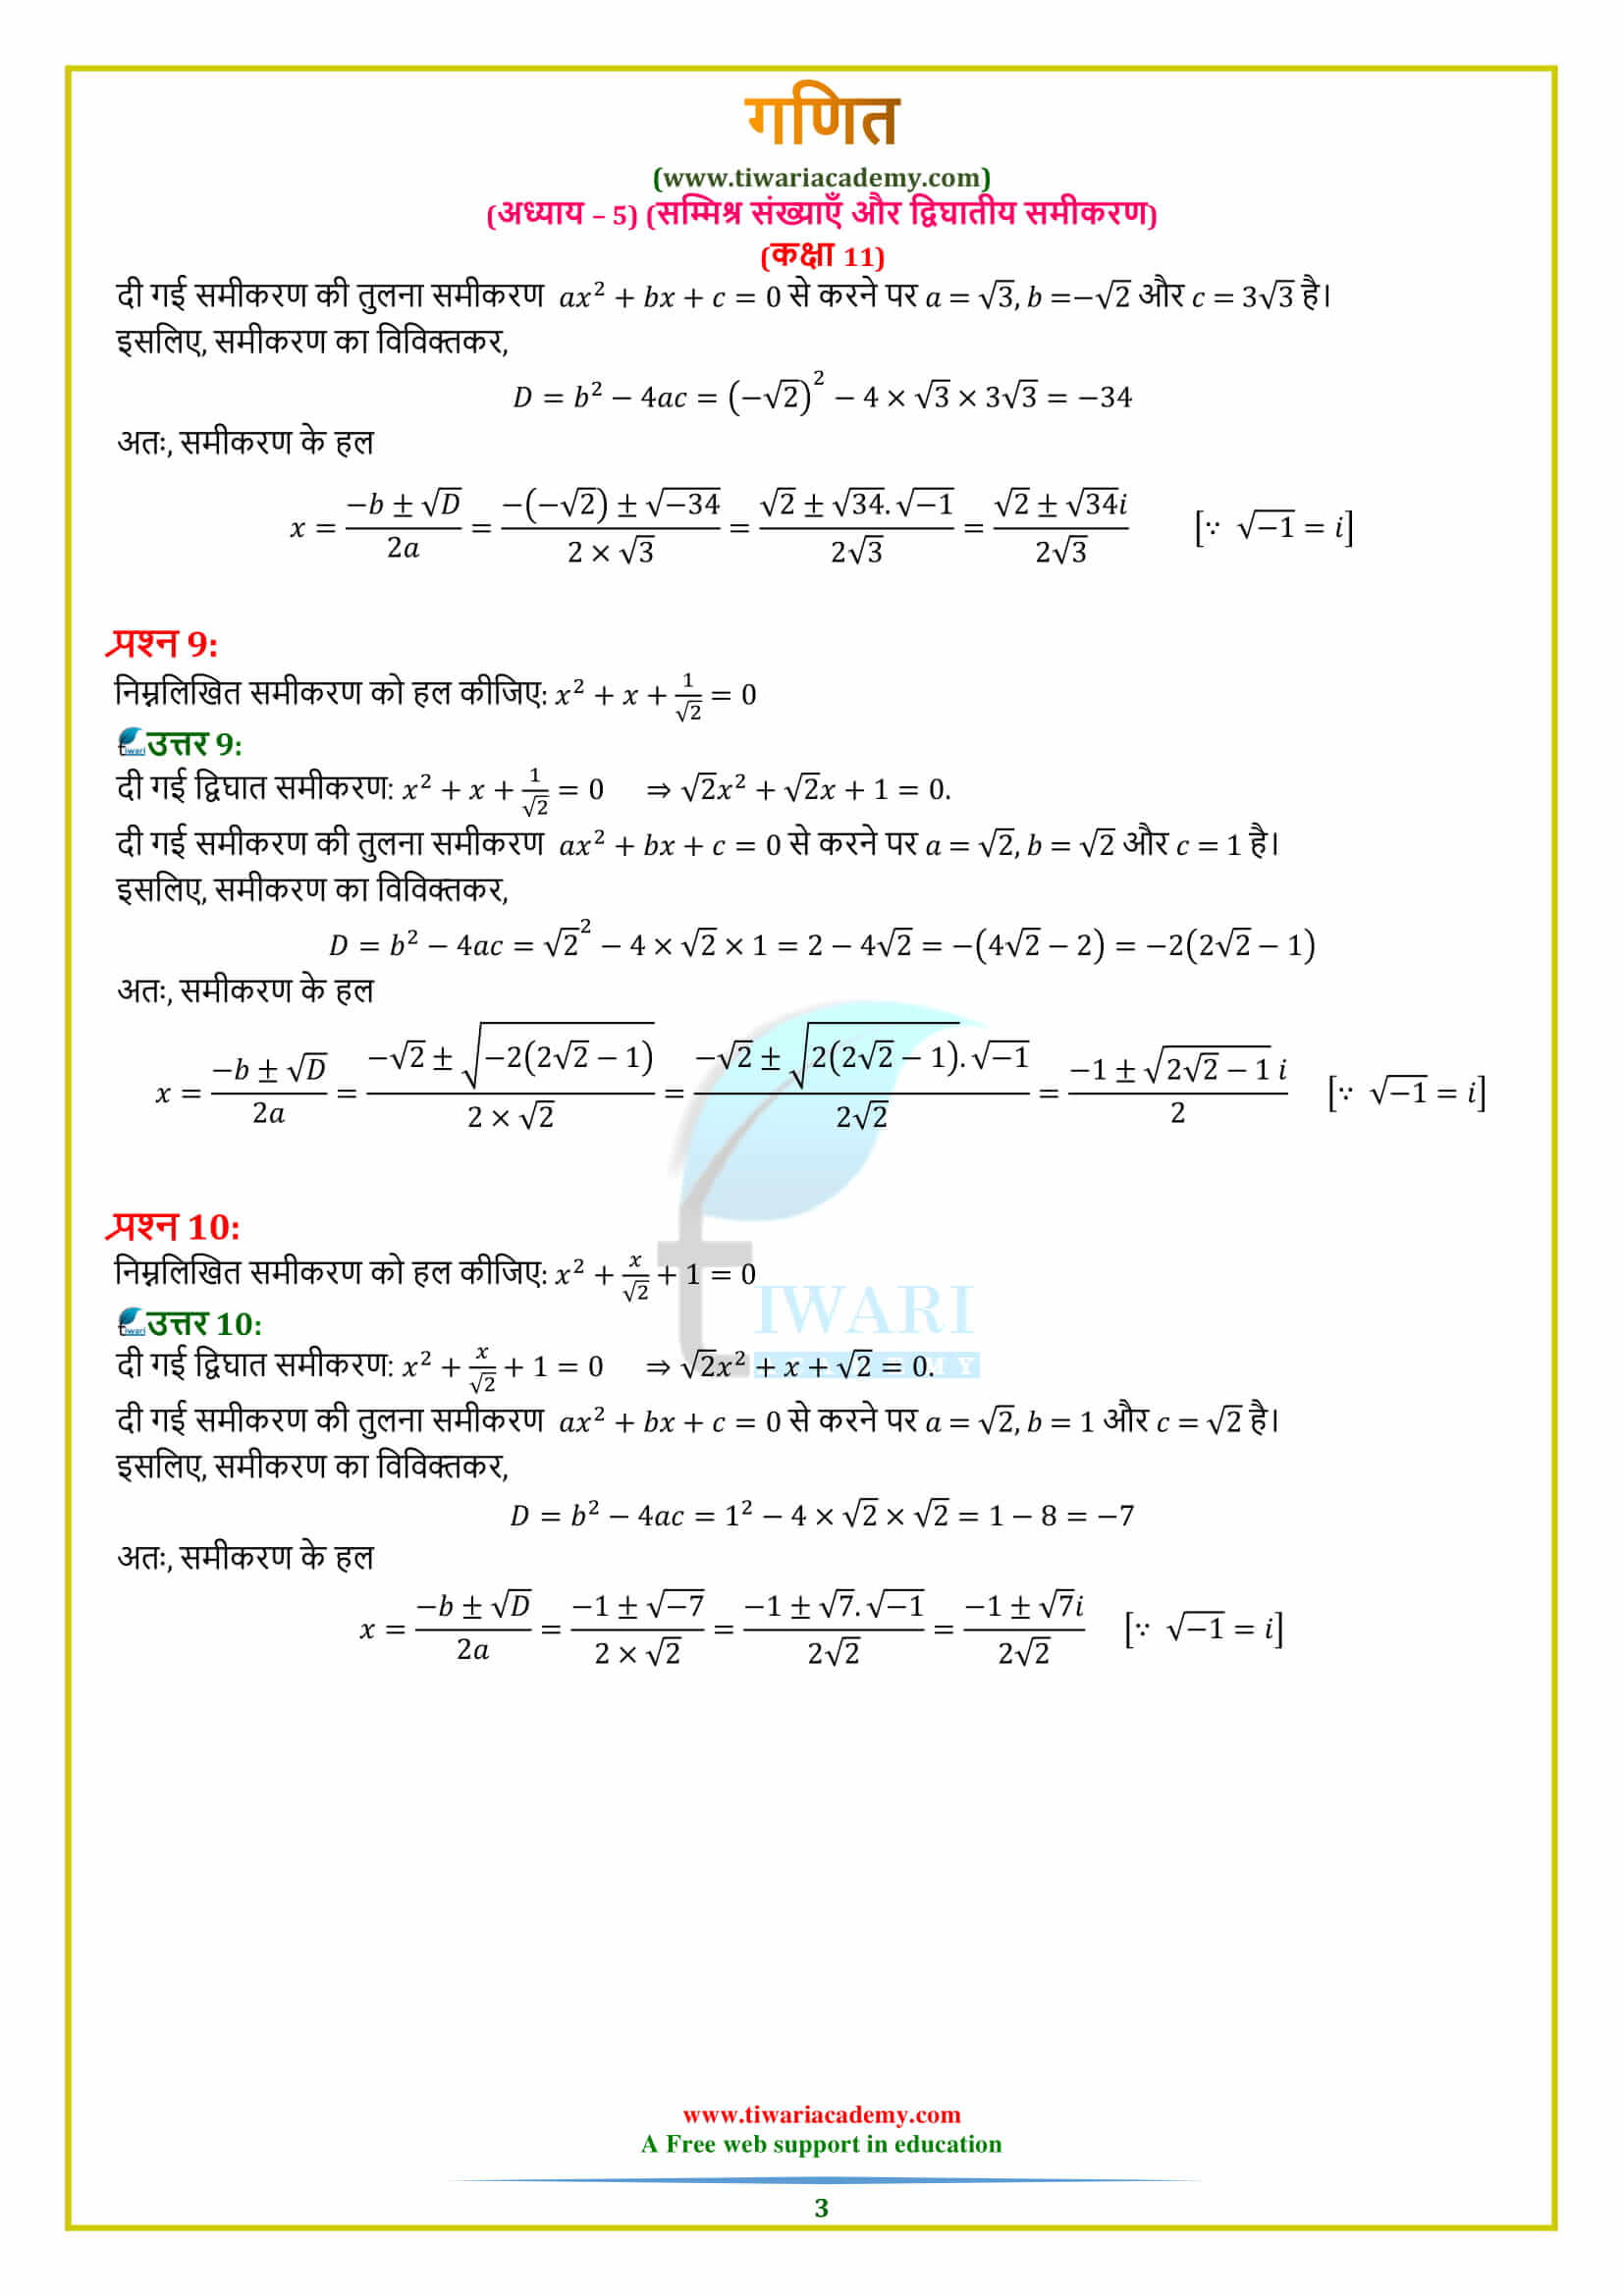 Class 11 Maths Chapter 5 Exercise 5.3 sols in Hindi all question answers